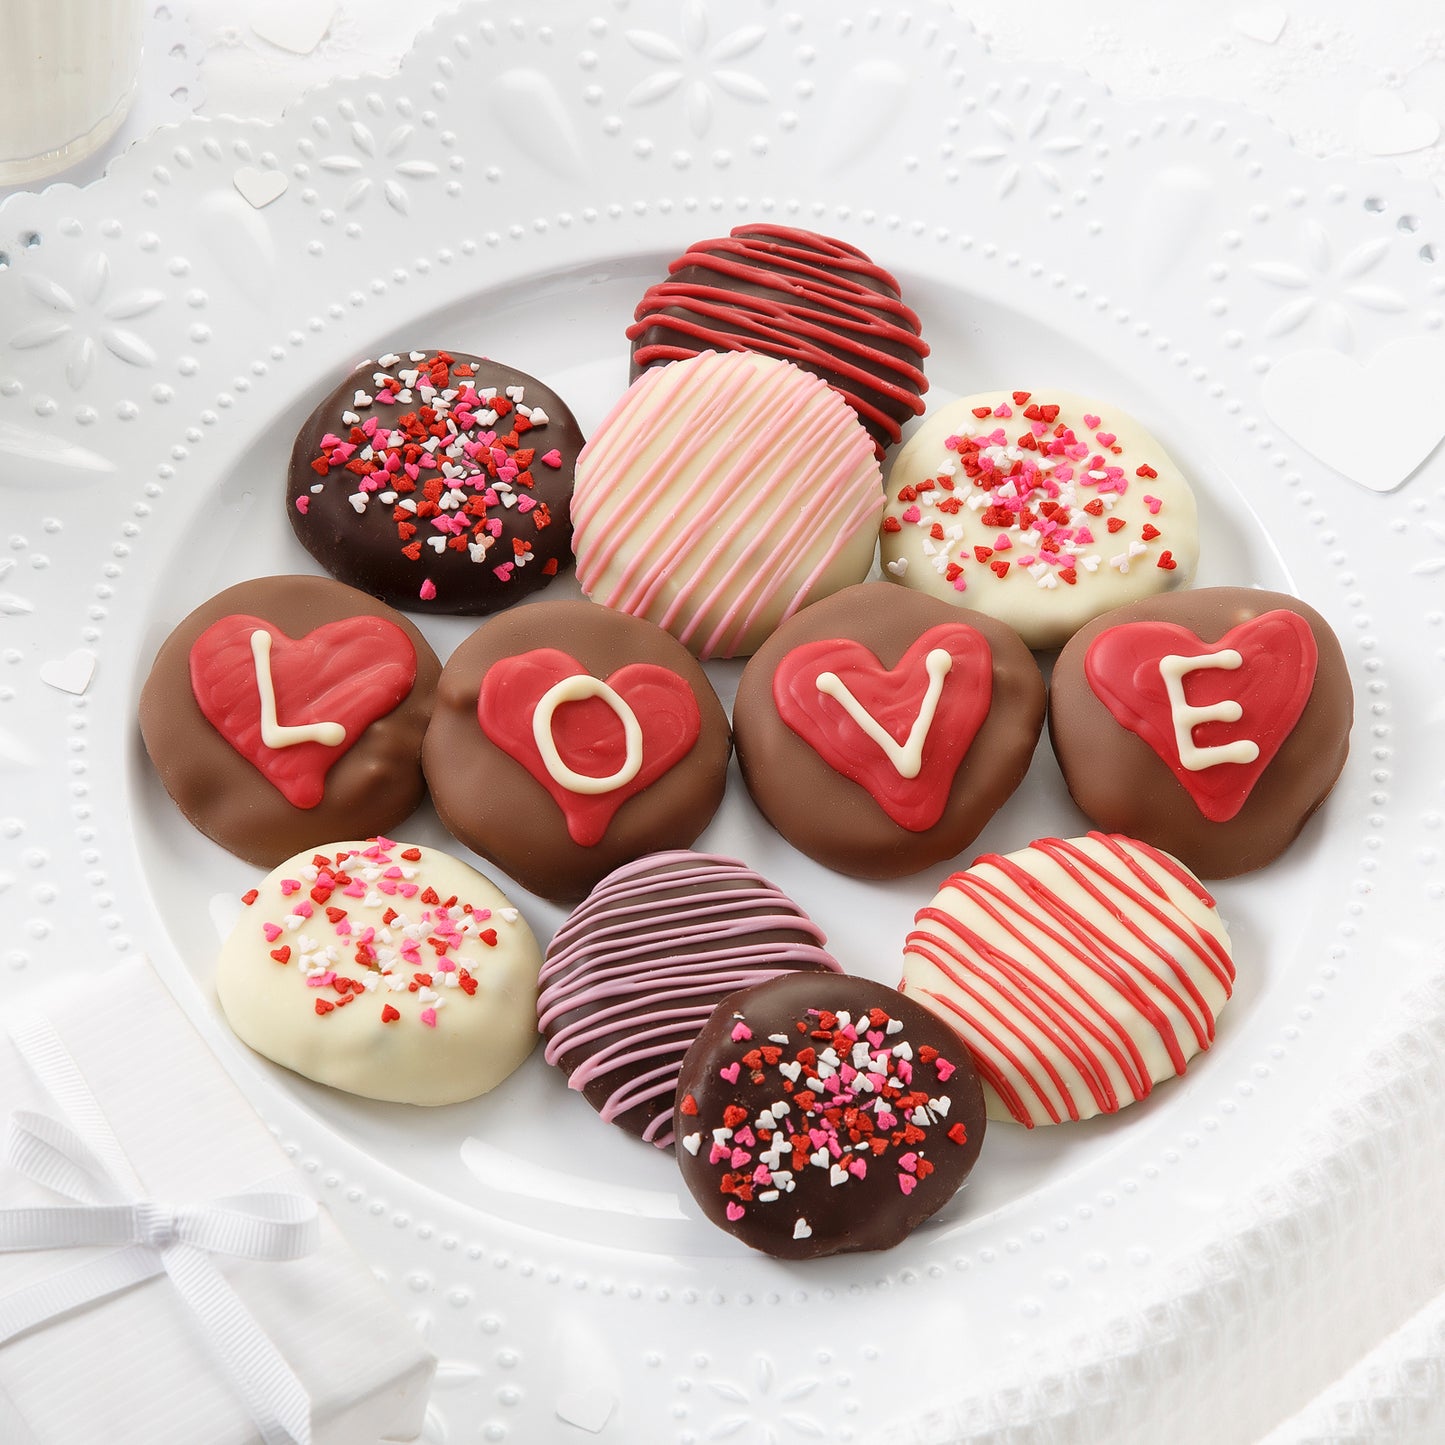 One dozen chocolate covered Valentine's Day themed nibblers